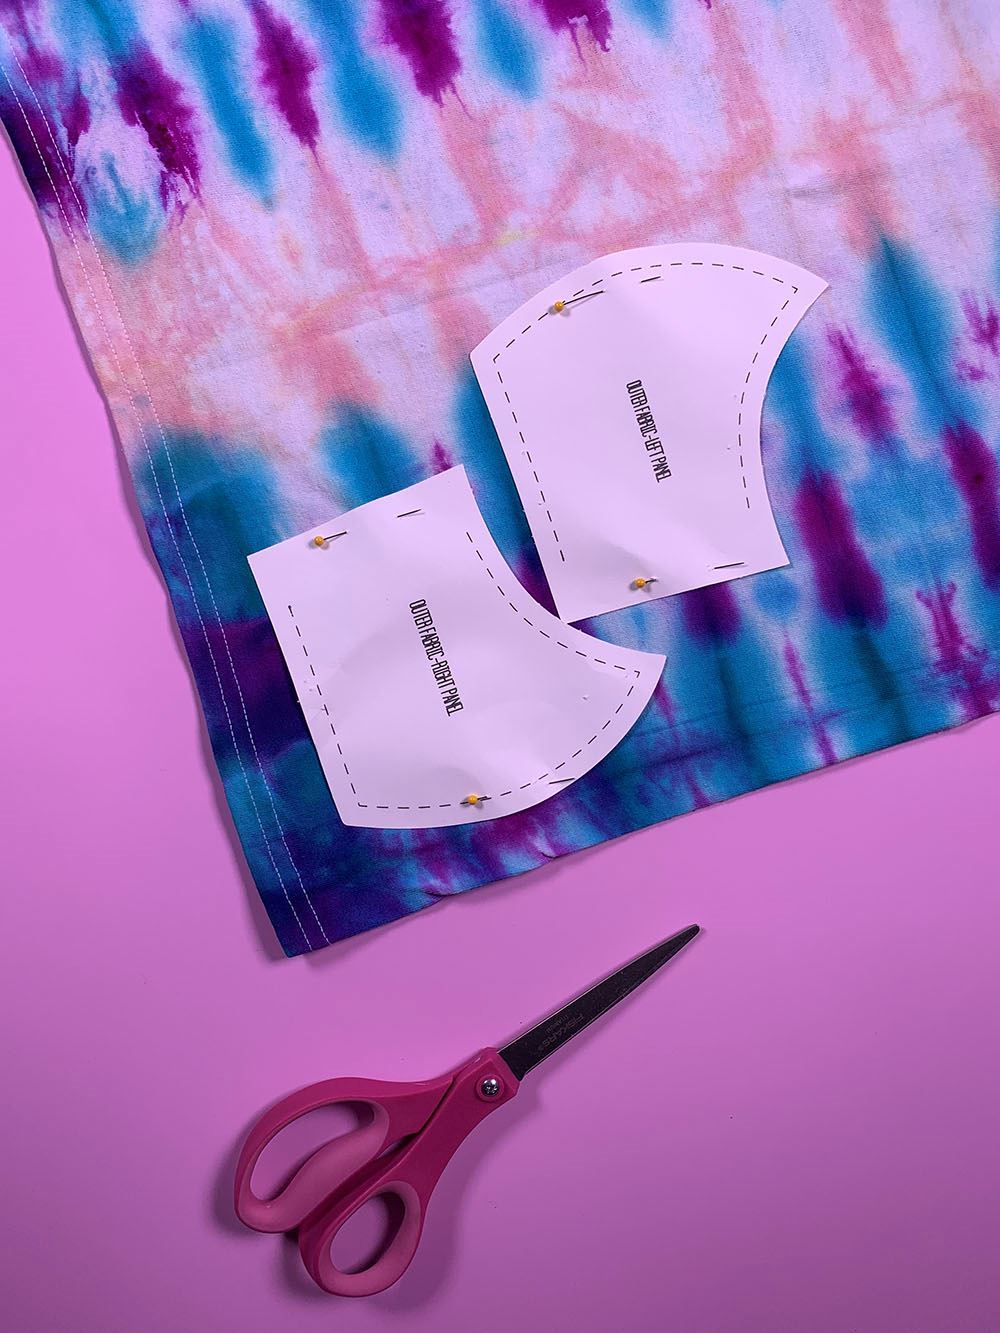 Tulip Tie-Dye Face Mask Tutorial - use pattern to cut fabric